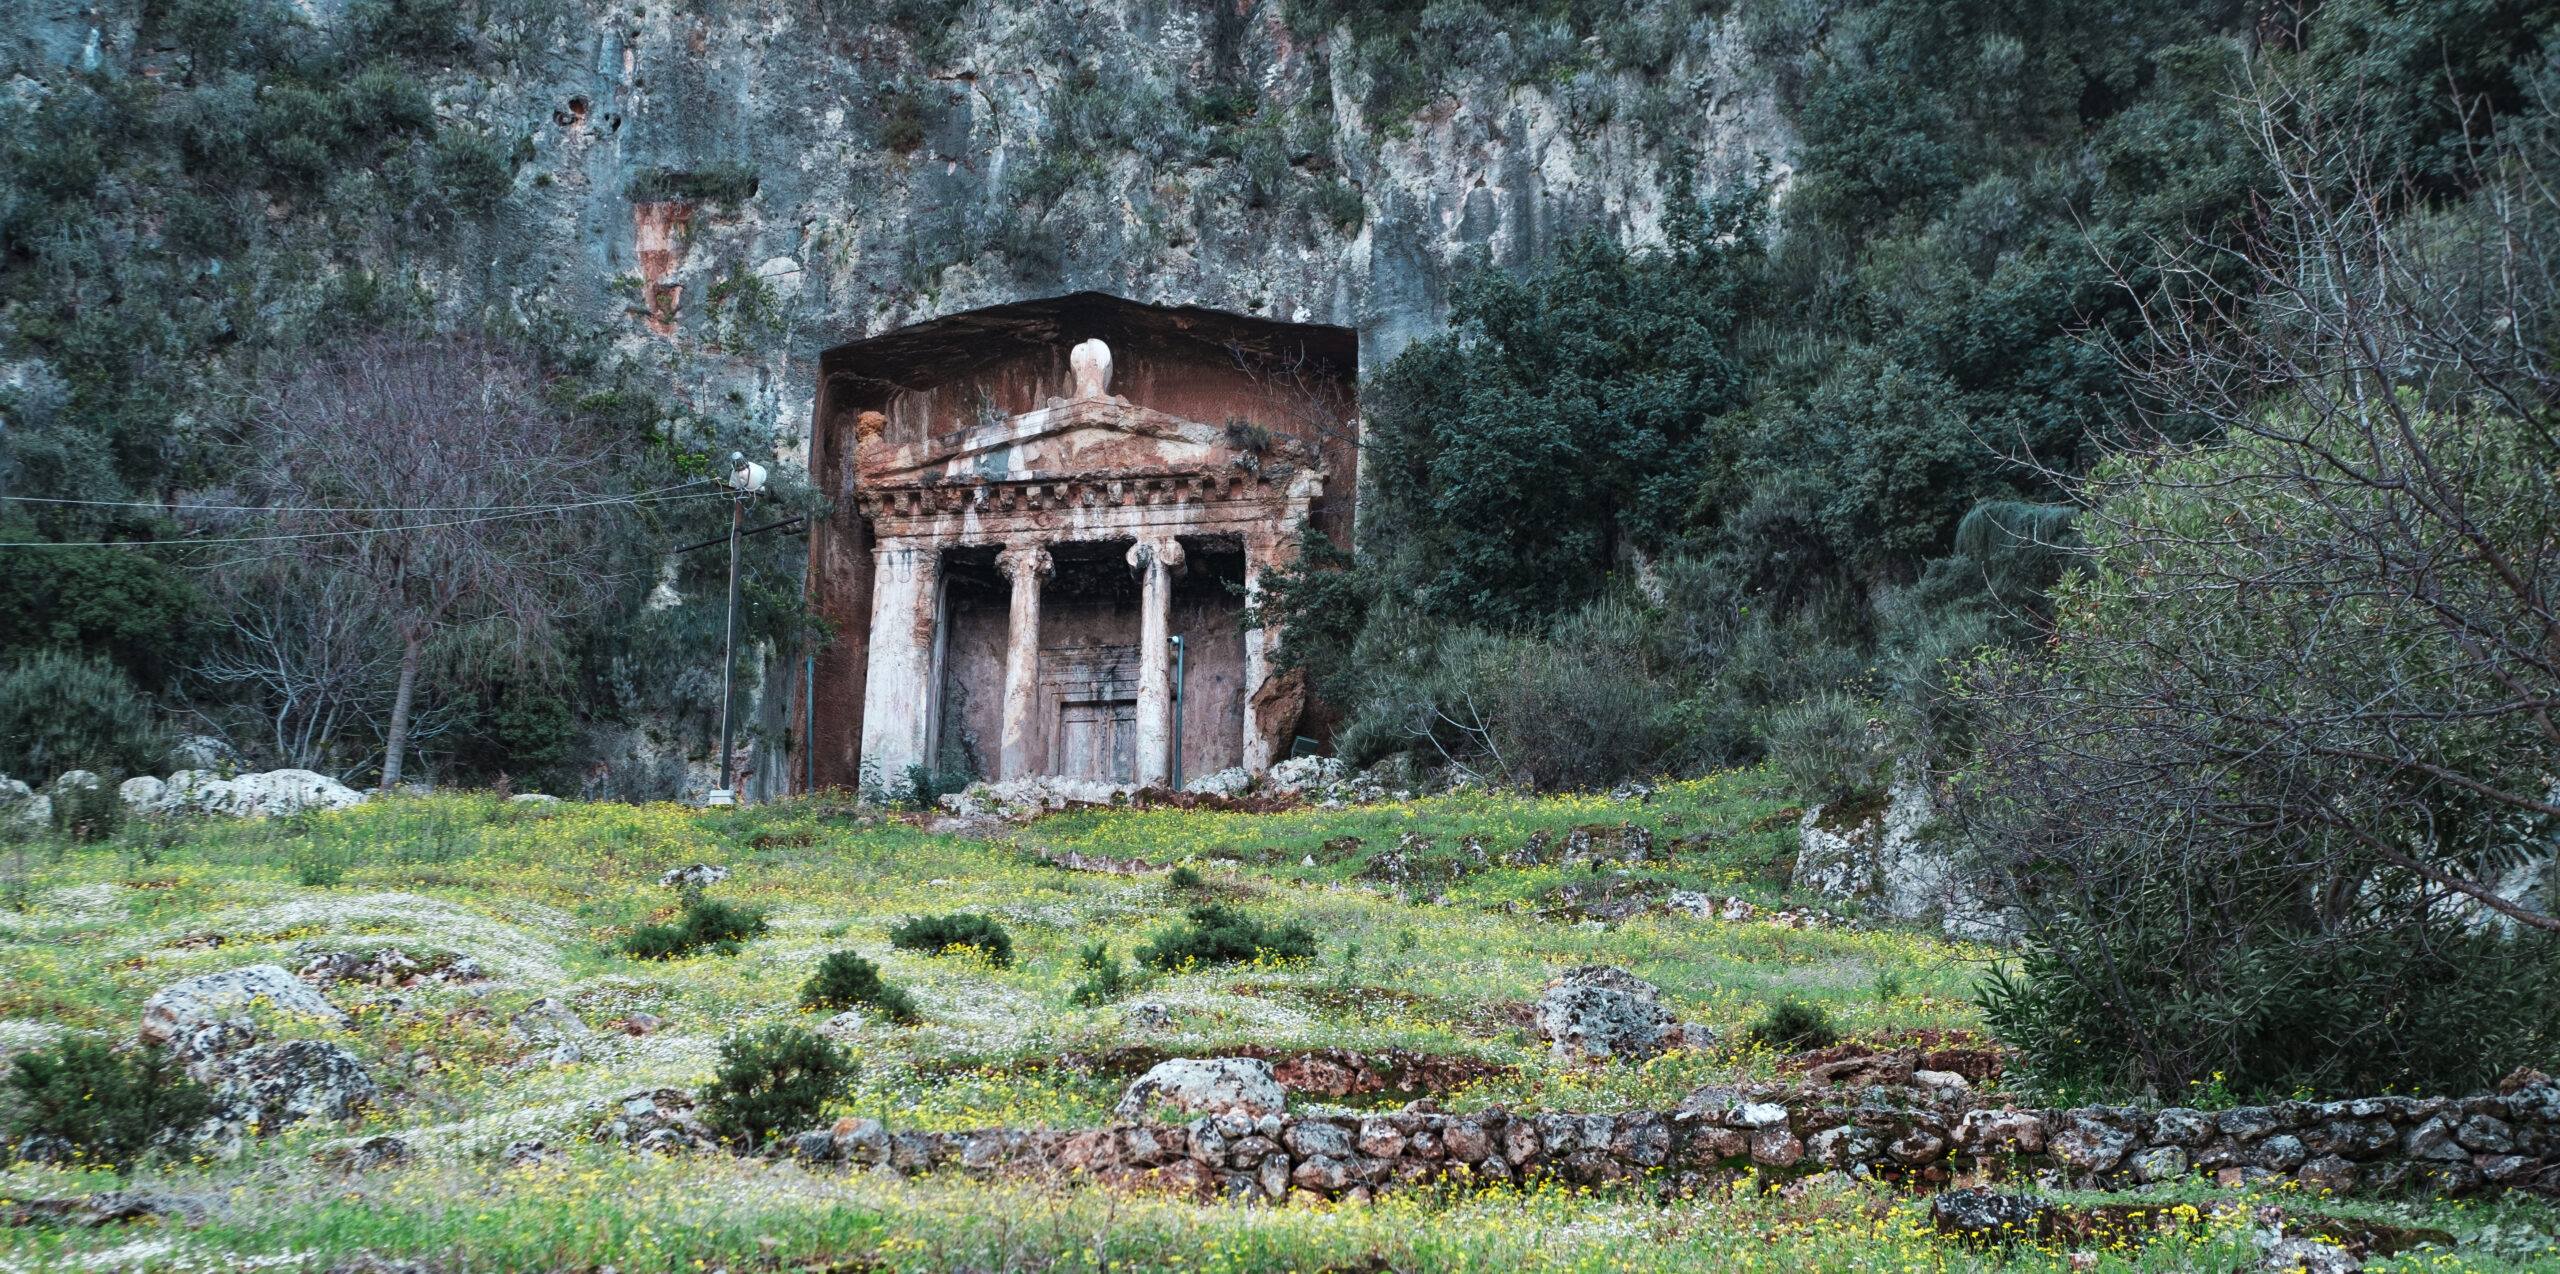 Ancient Lycian tombs,  Carved into the side of the cliff, the Tomb of Amyntas, historical graves in Fethiye